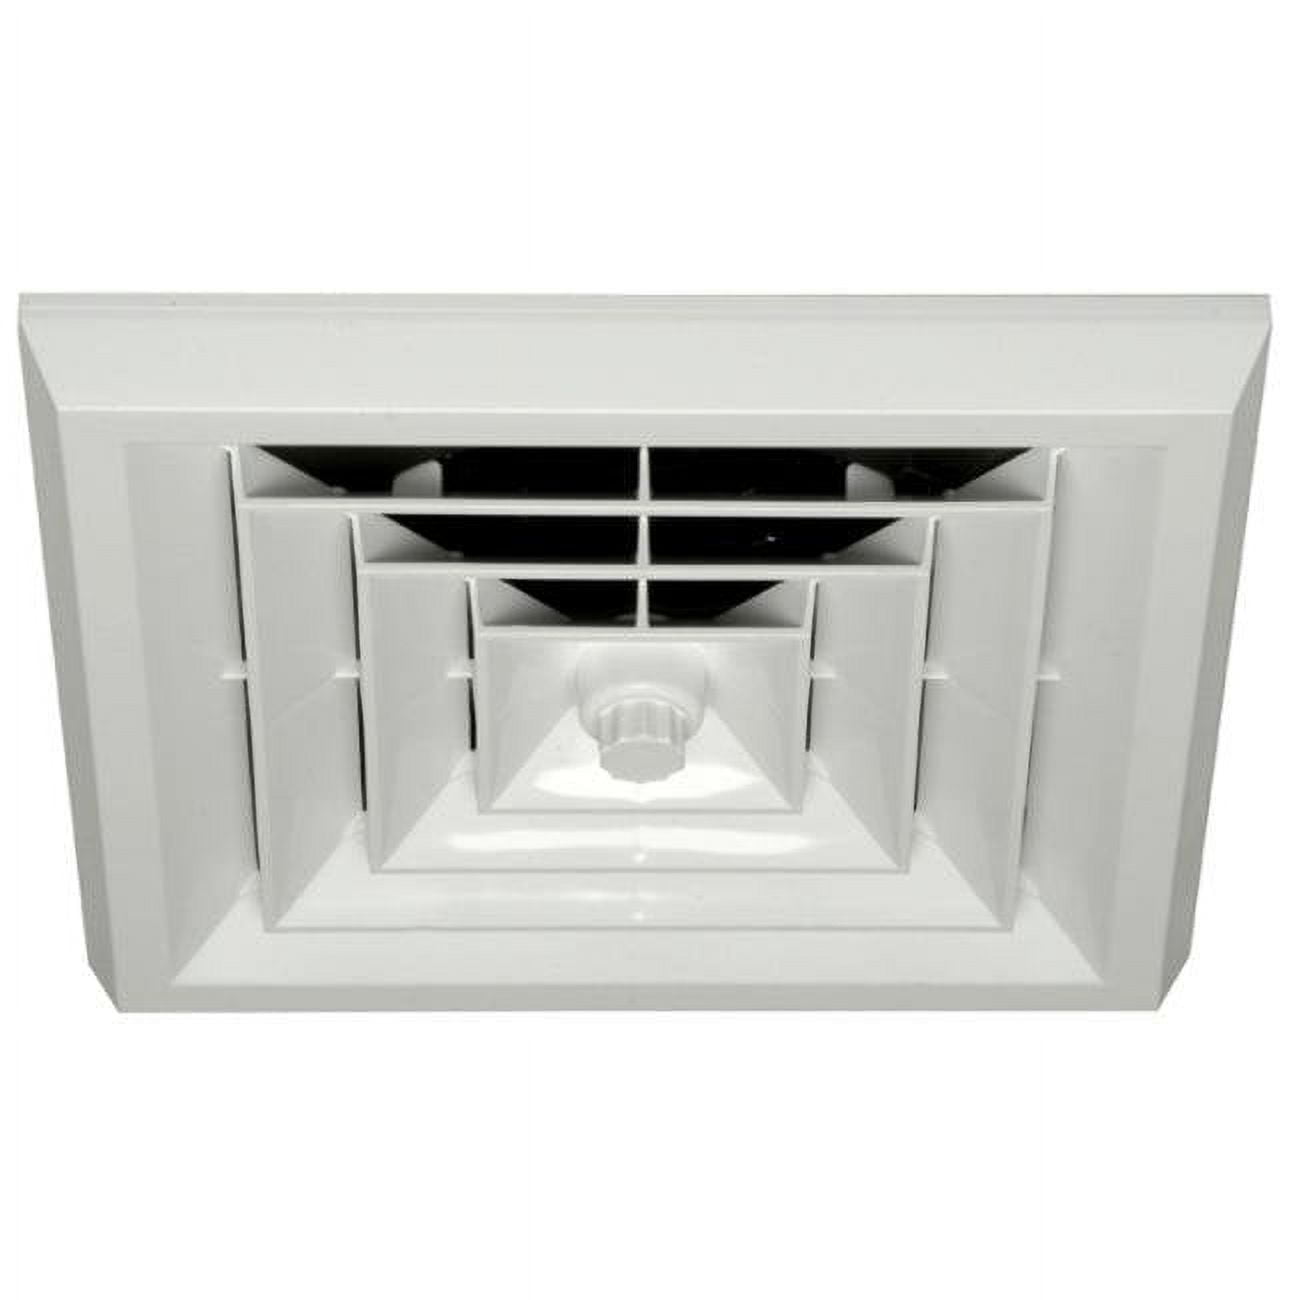 Strong Magnetic Vent Cover Register Cover for Air Vents & Looks Like a Vent  Grille! an AC Vent Deflector in A Magnetic Sheet Form - Pure White Magnetic  Sheet - 8 inch